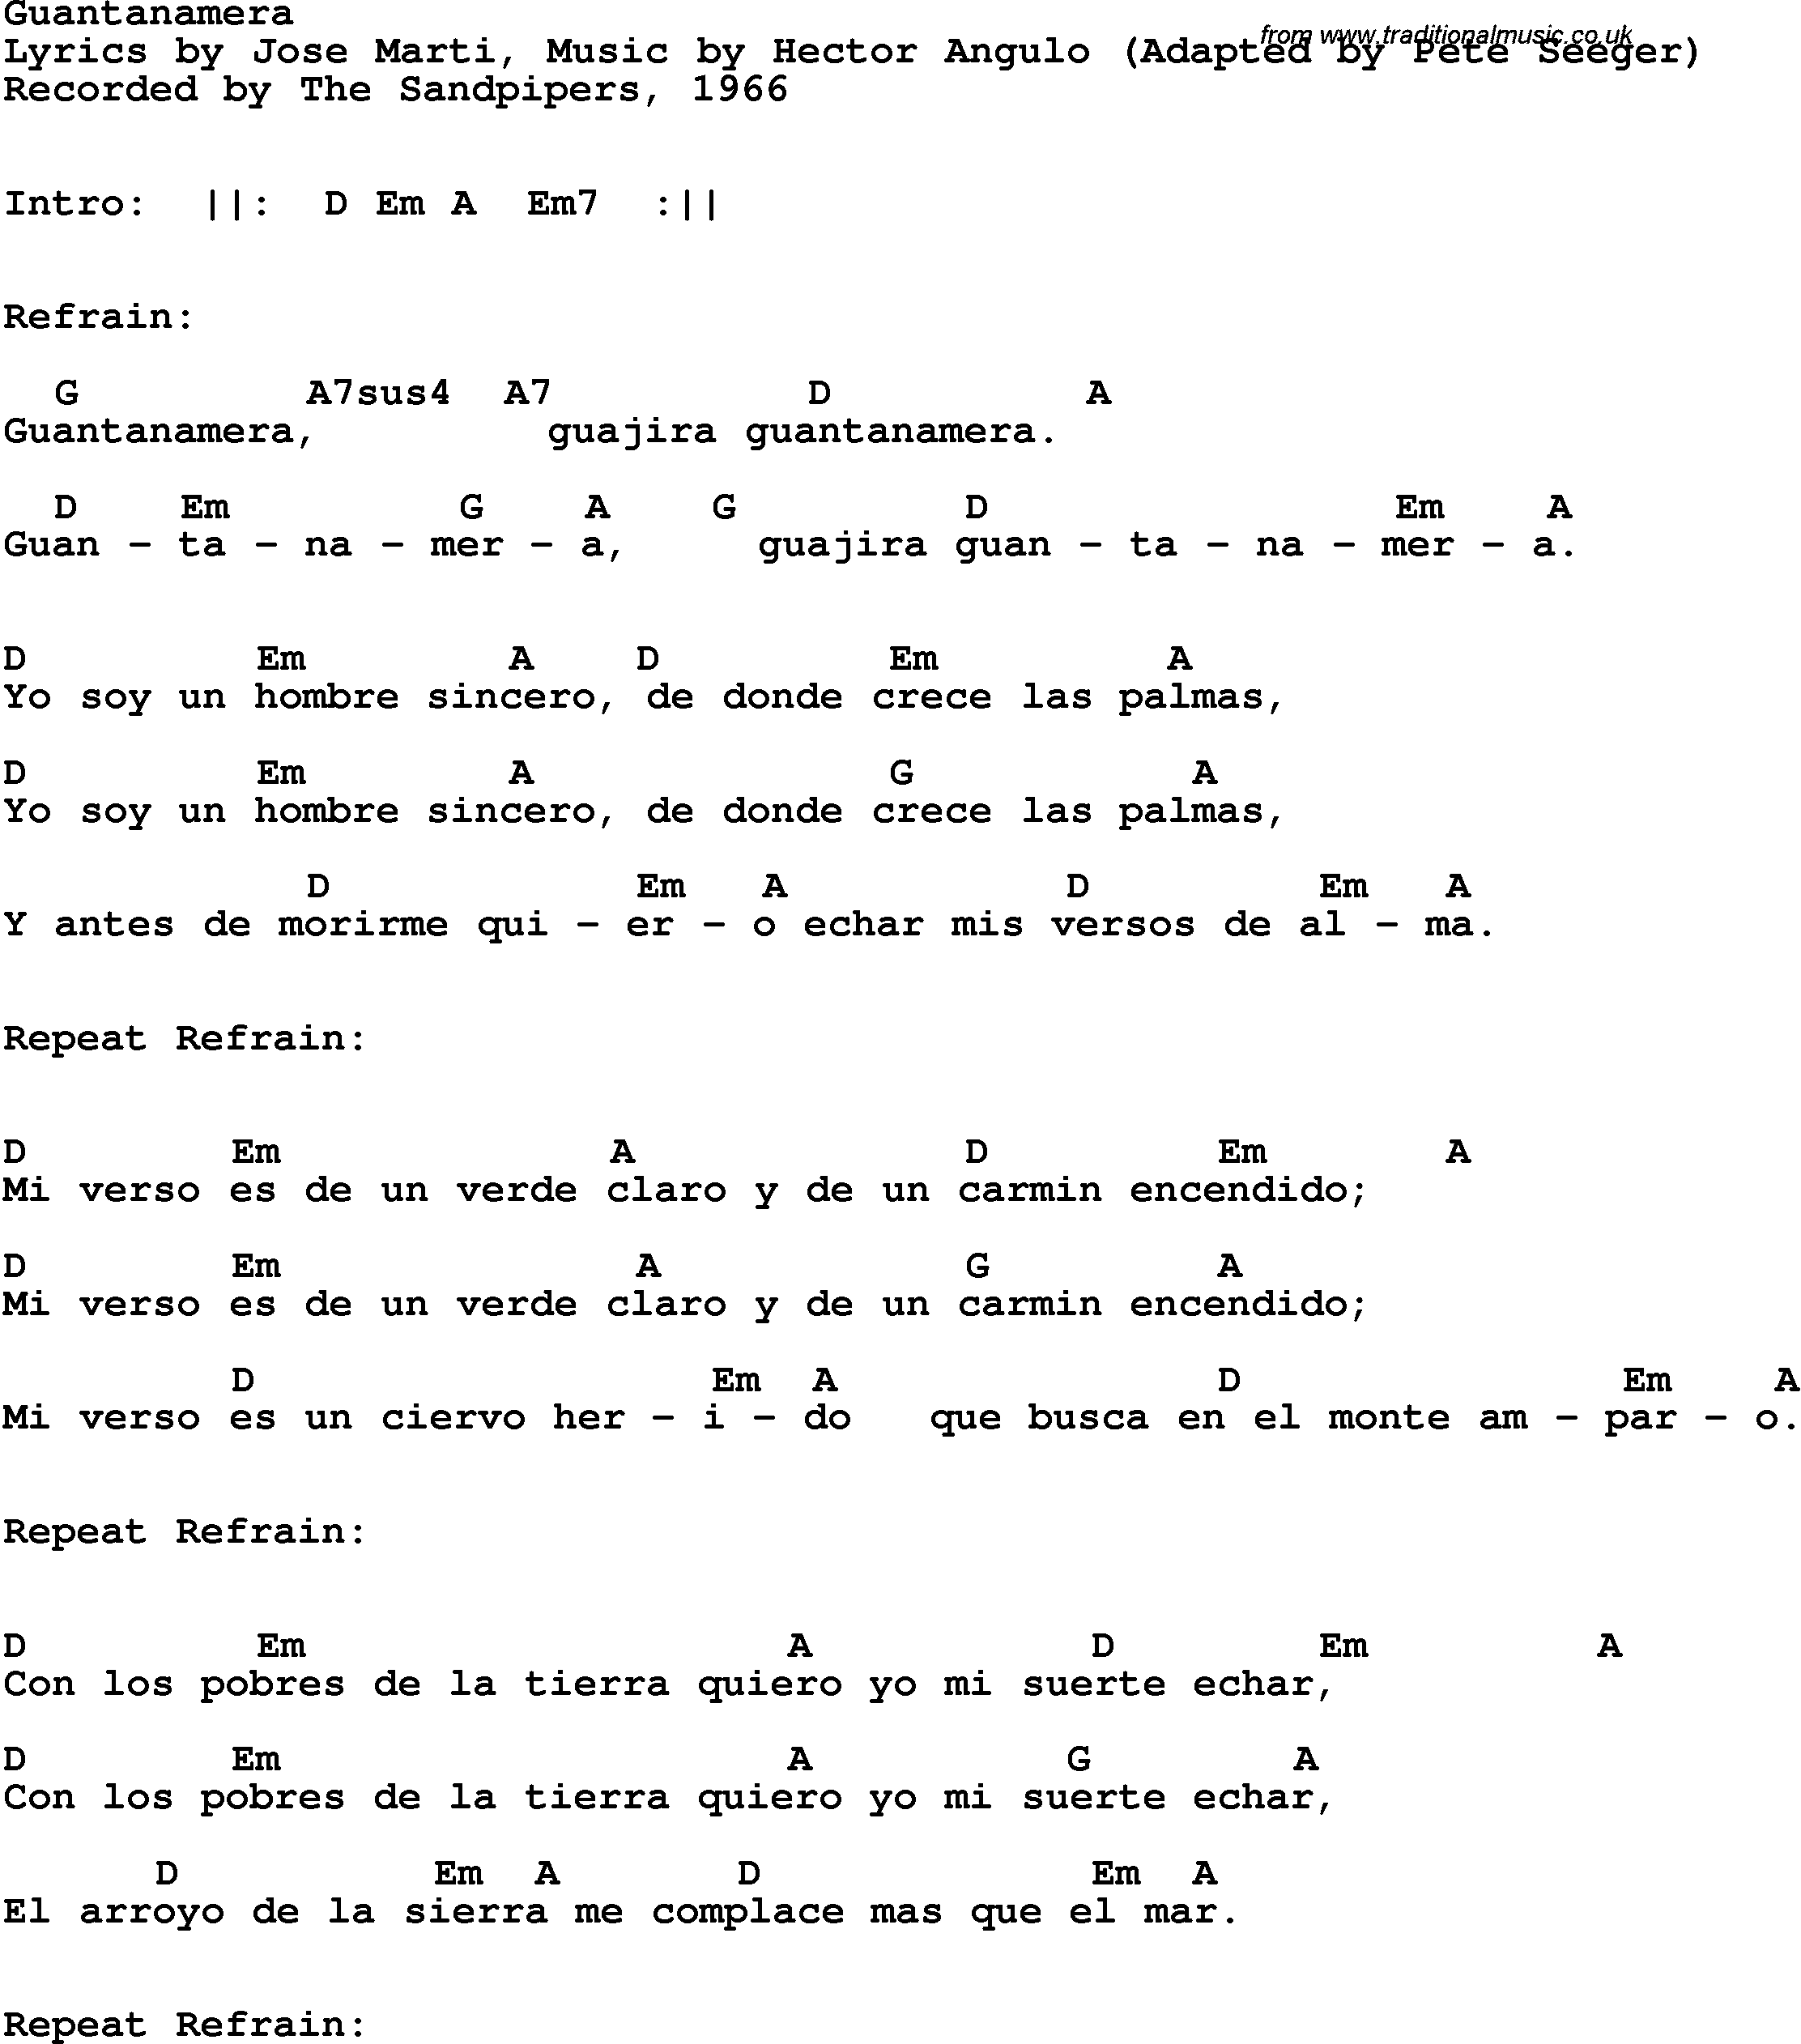 Song Lyrics with guitar chords for Guantanamera - The Sandpipers, 1966